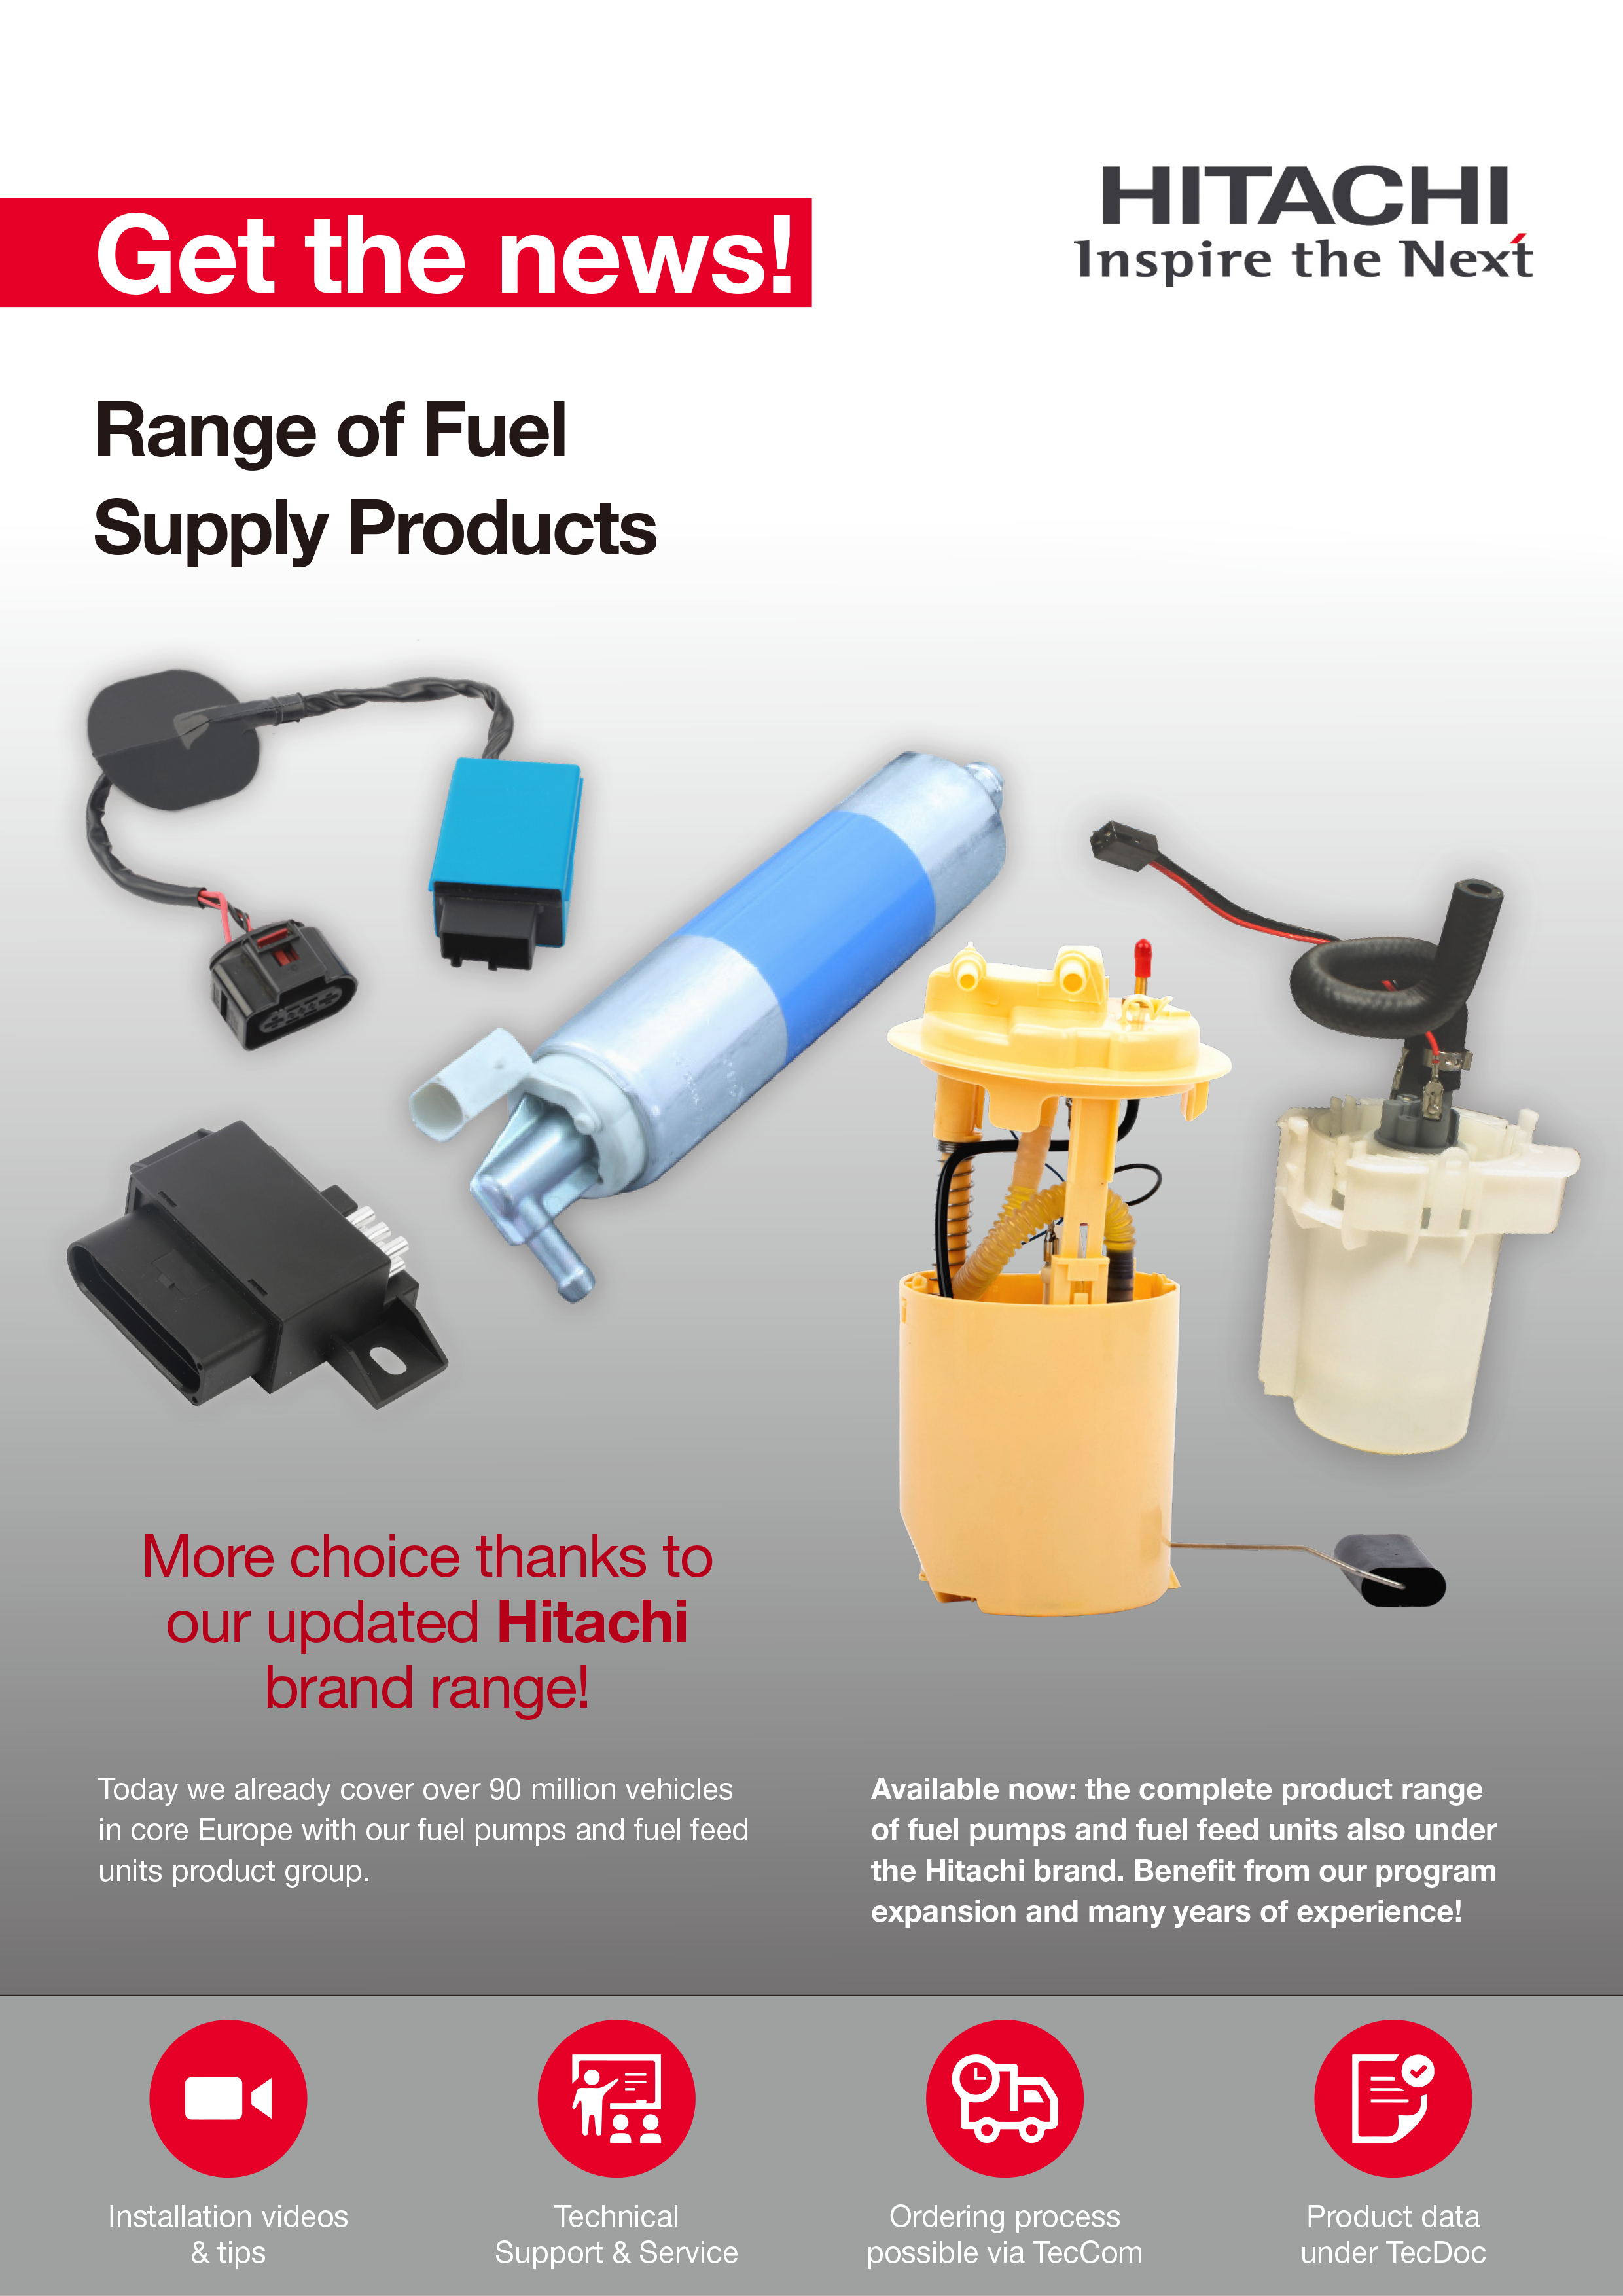 Fuel Supply Products